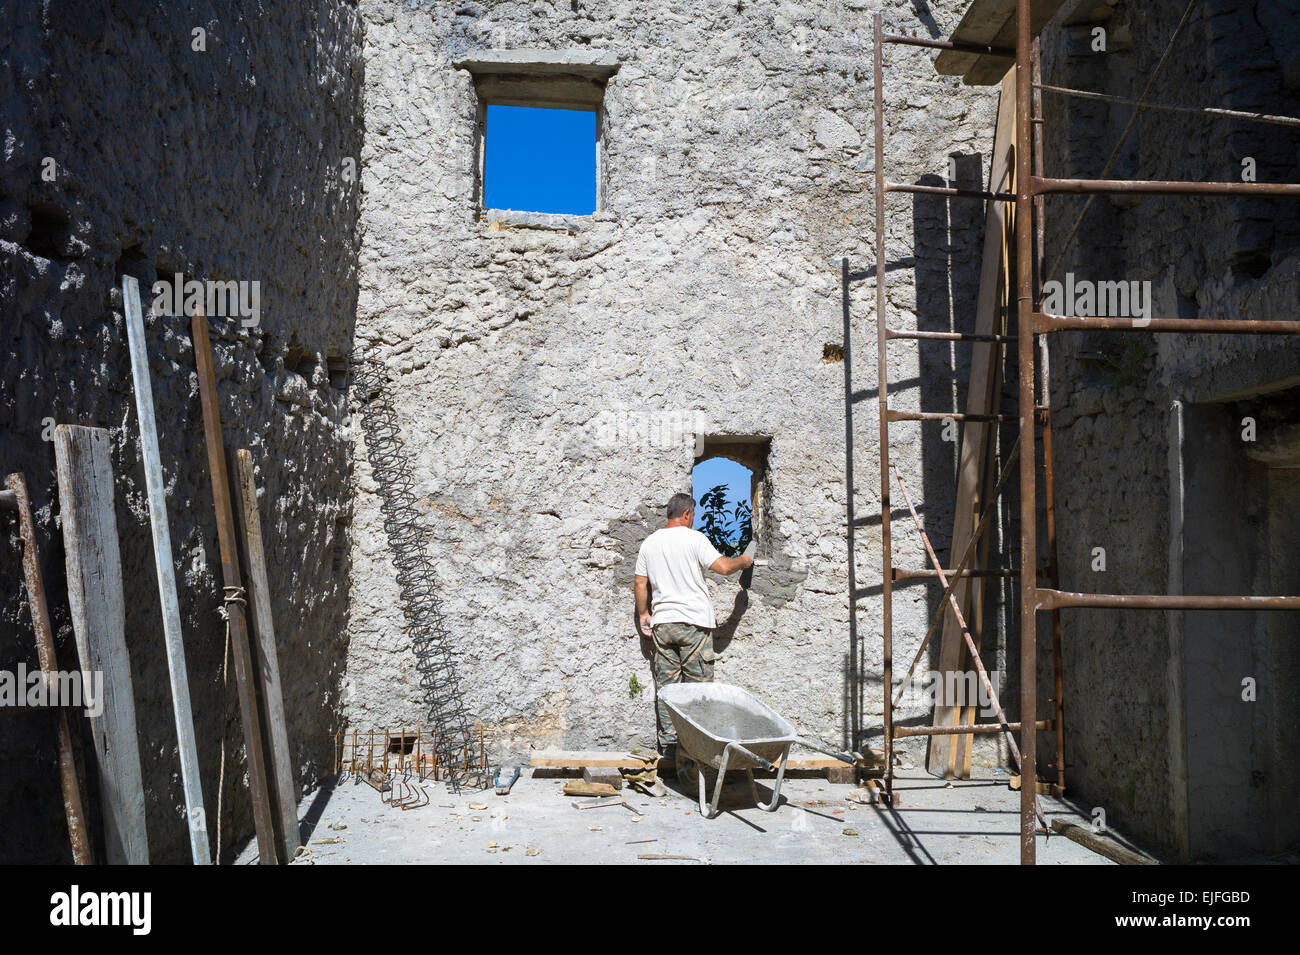 Builder doing masonry building work restoring derelict old stone house in ruins in village of Old Perithia - Palea Perithea, Cor Stock Photo